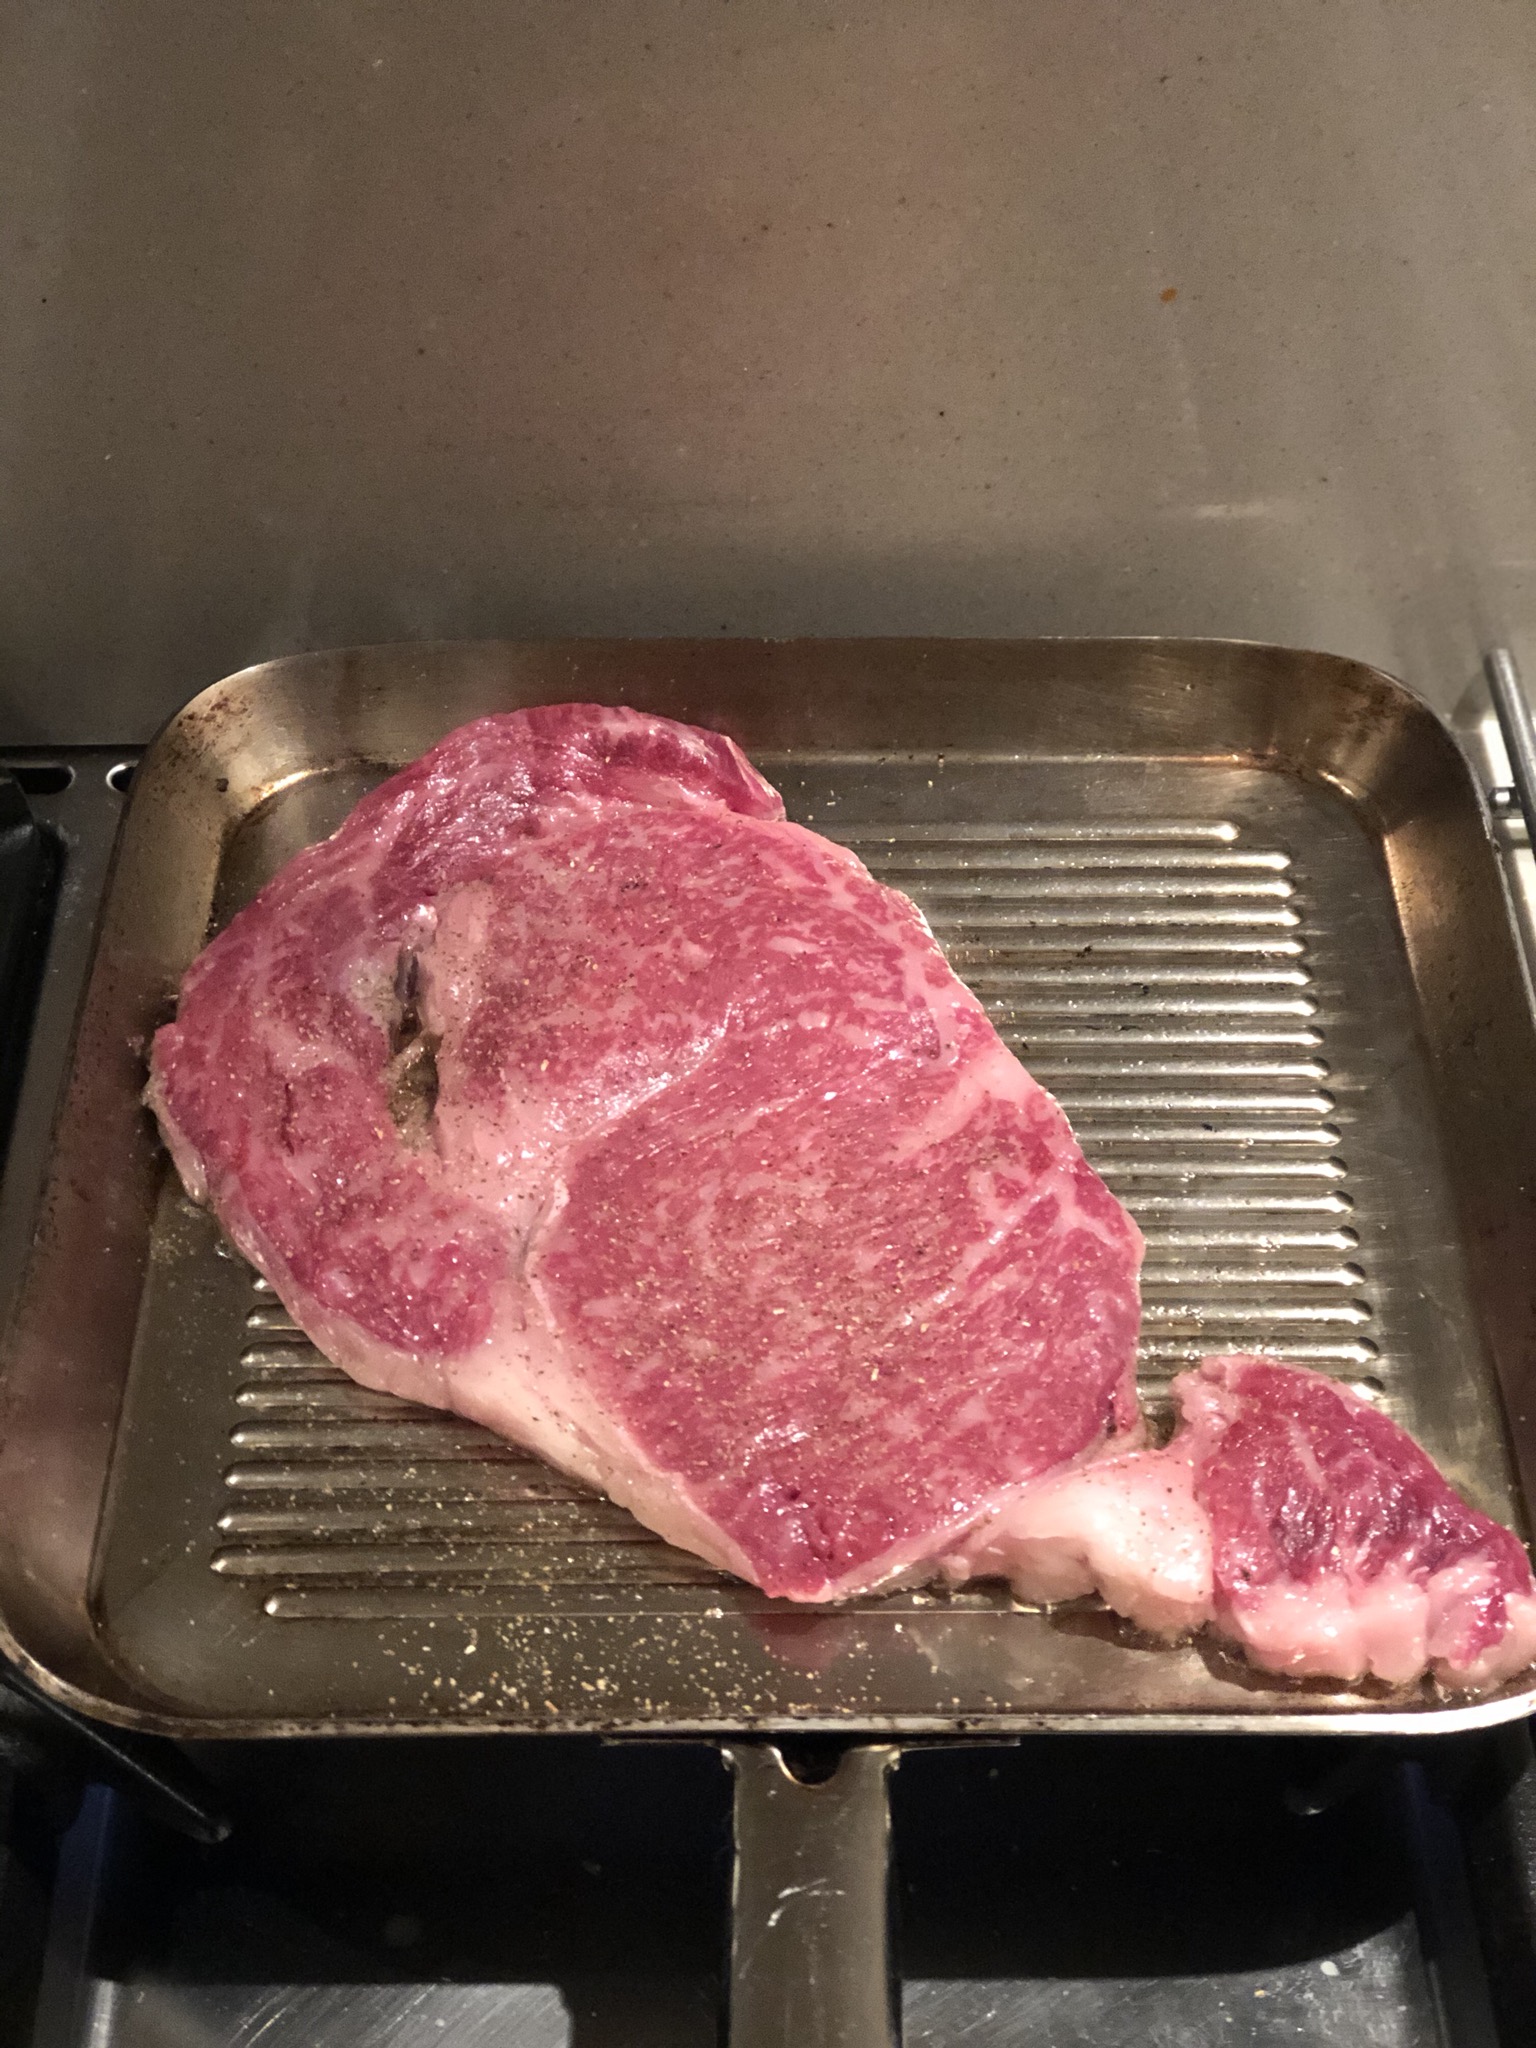 Wagyu on the grill